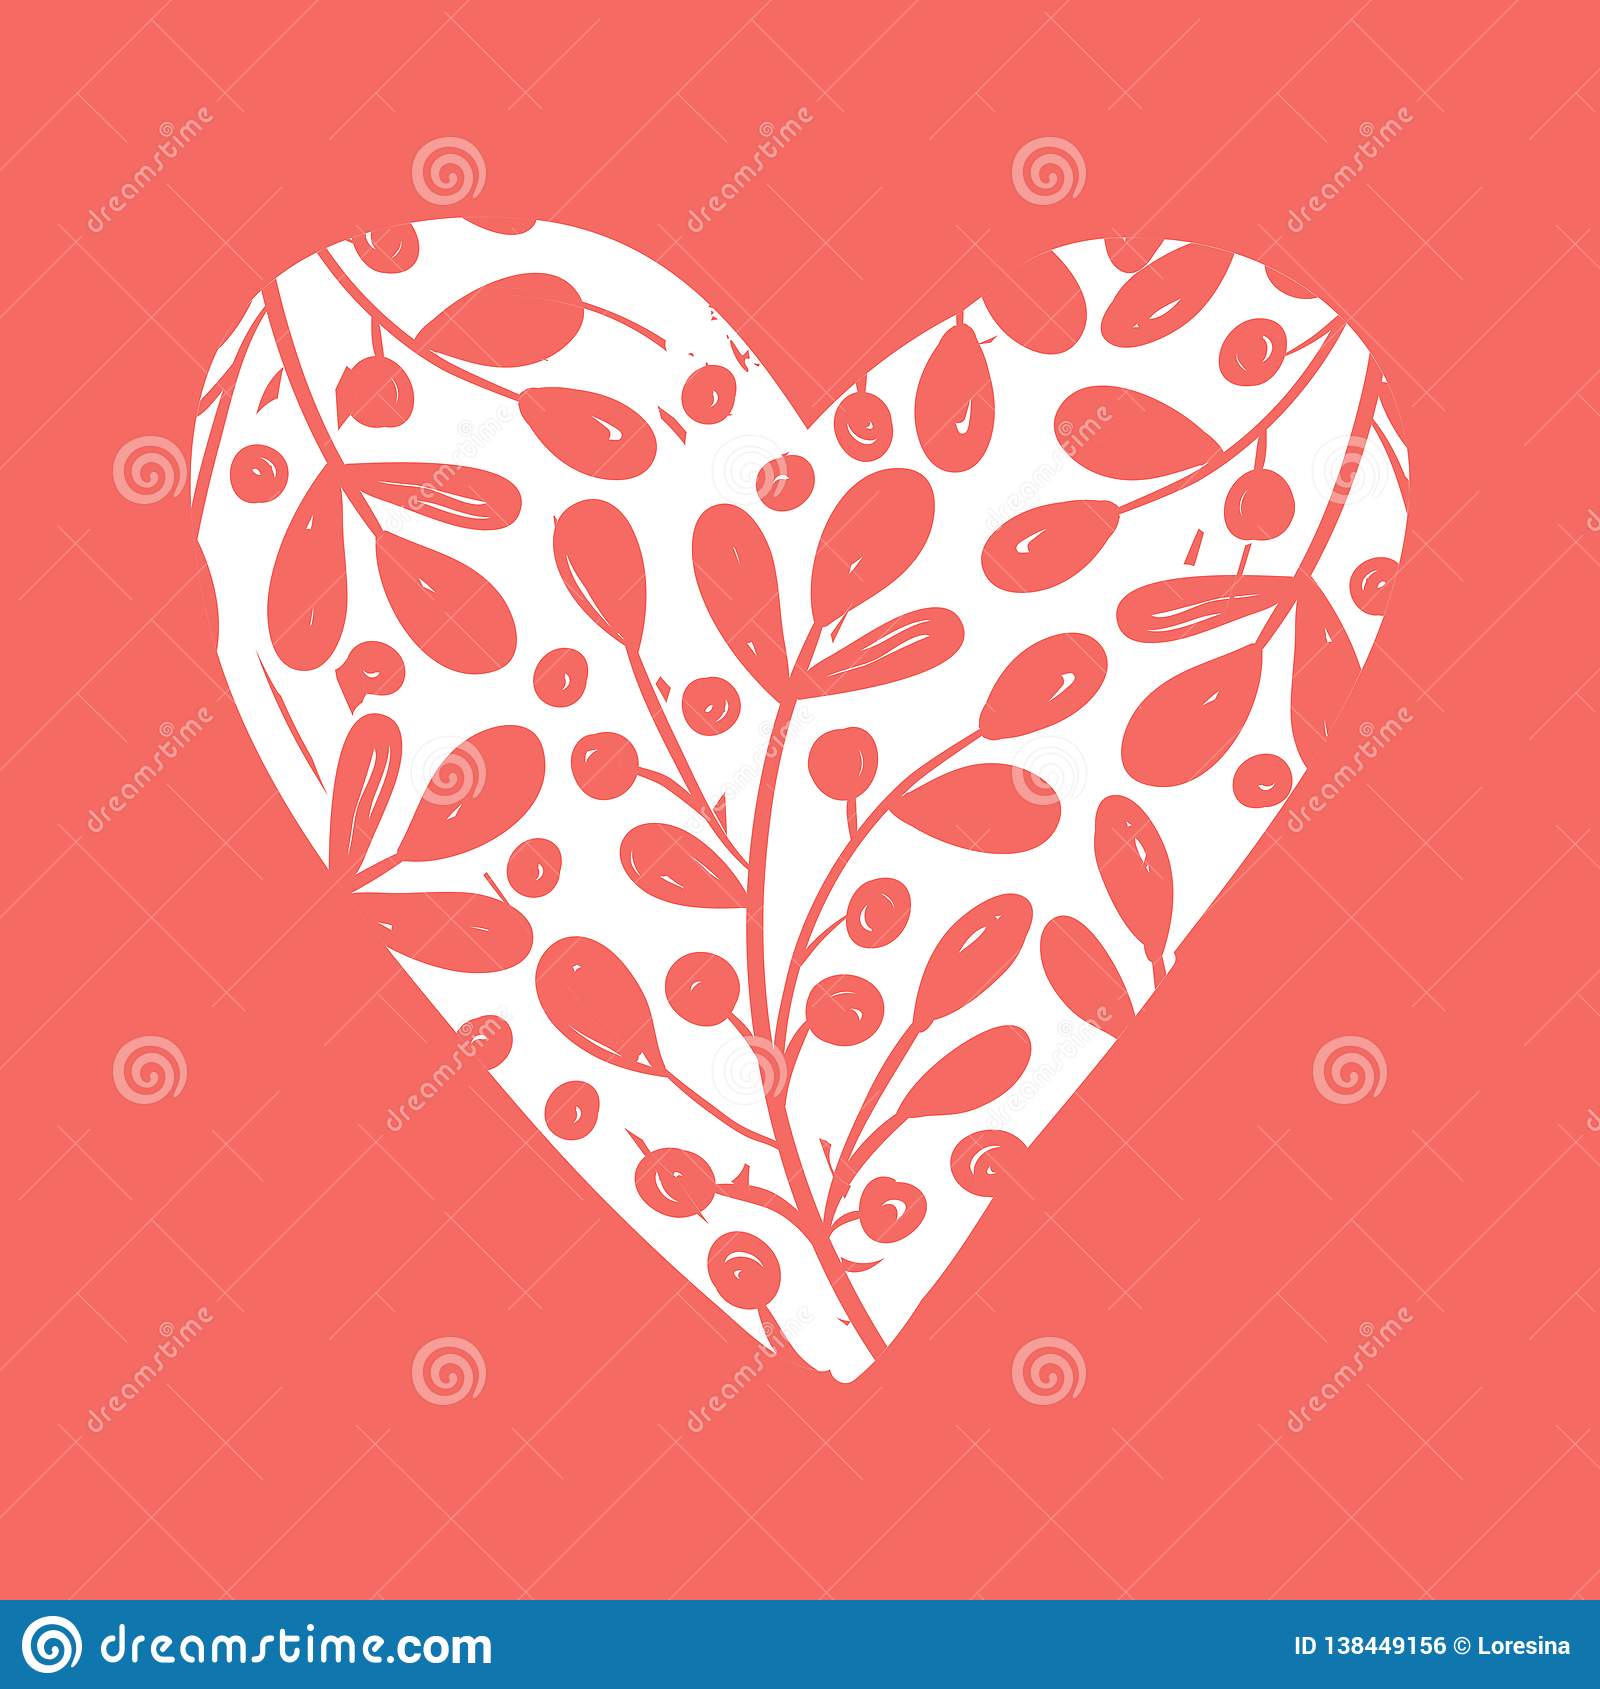 Vector Collections Of Hand Drawn Heart Isolated On Transparent.